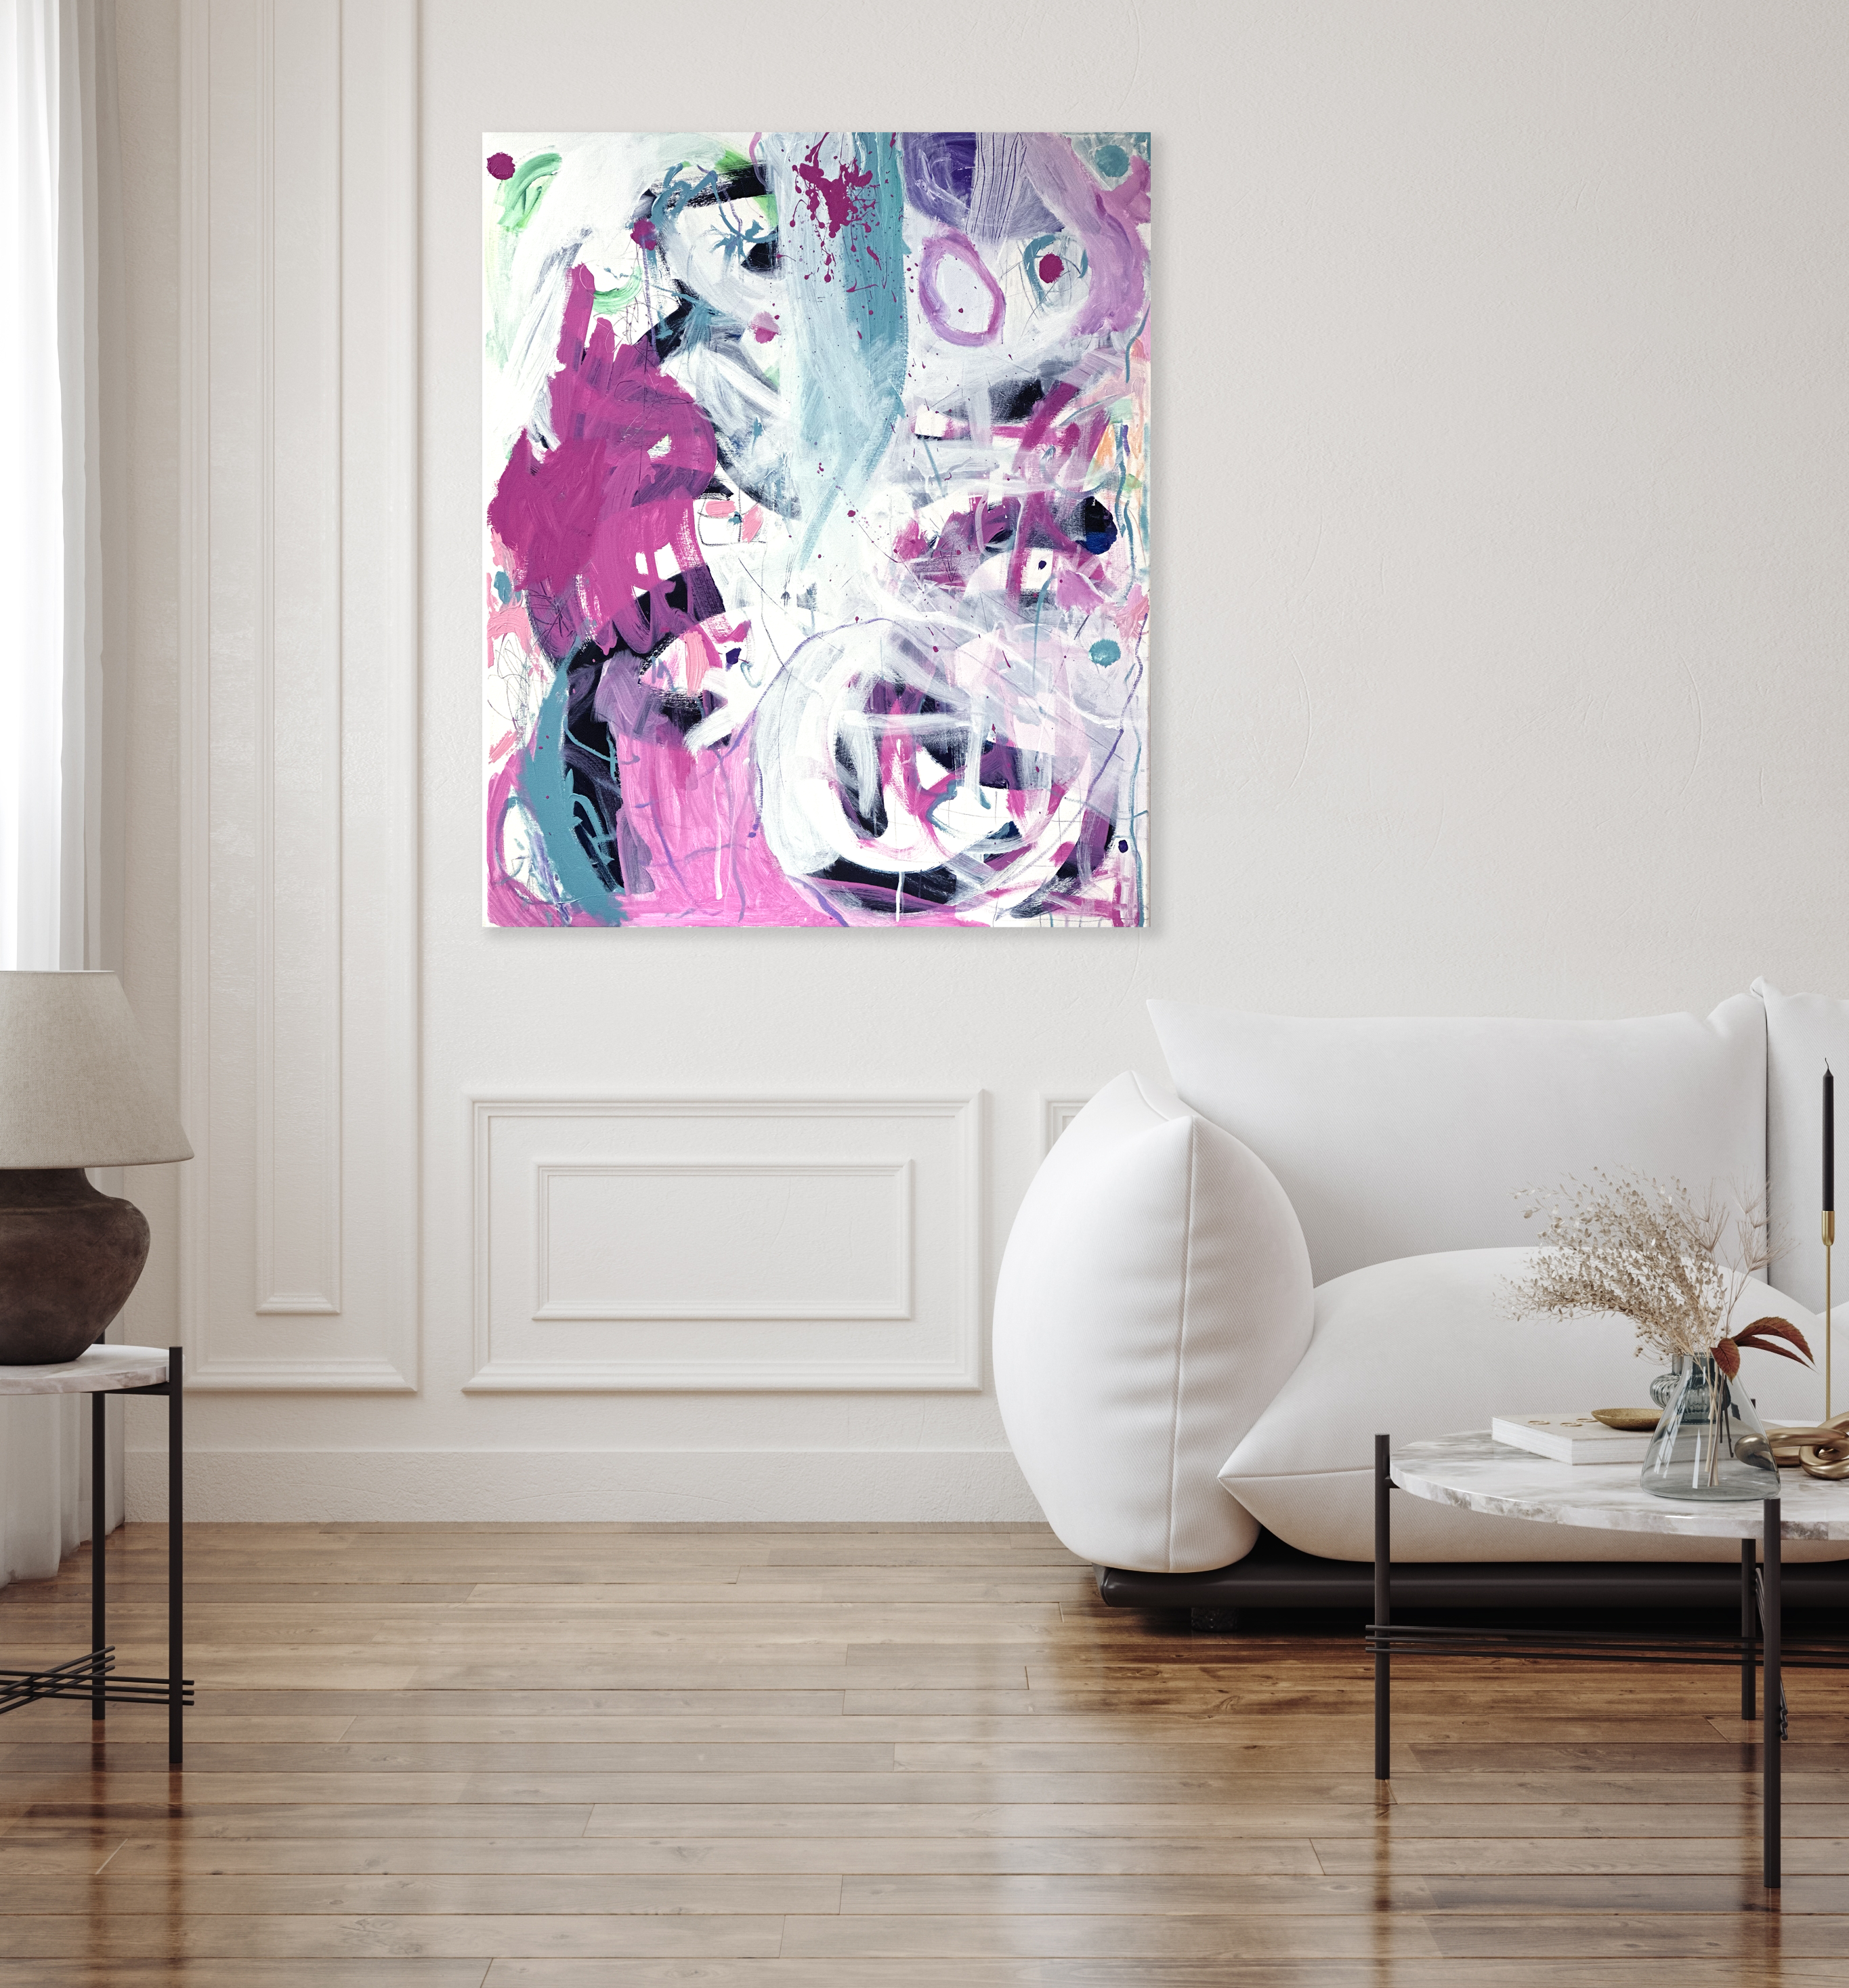 Abstract art work in modern lounge room. White lounge and wooden floors. Bright coloured artwork. Home decor. Abstract pink artwork. Pink painting.